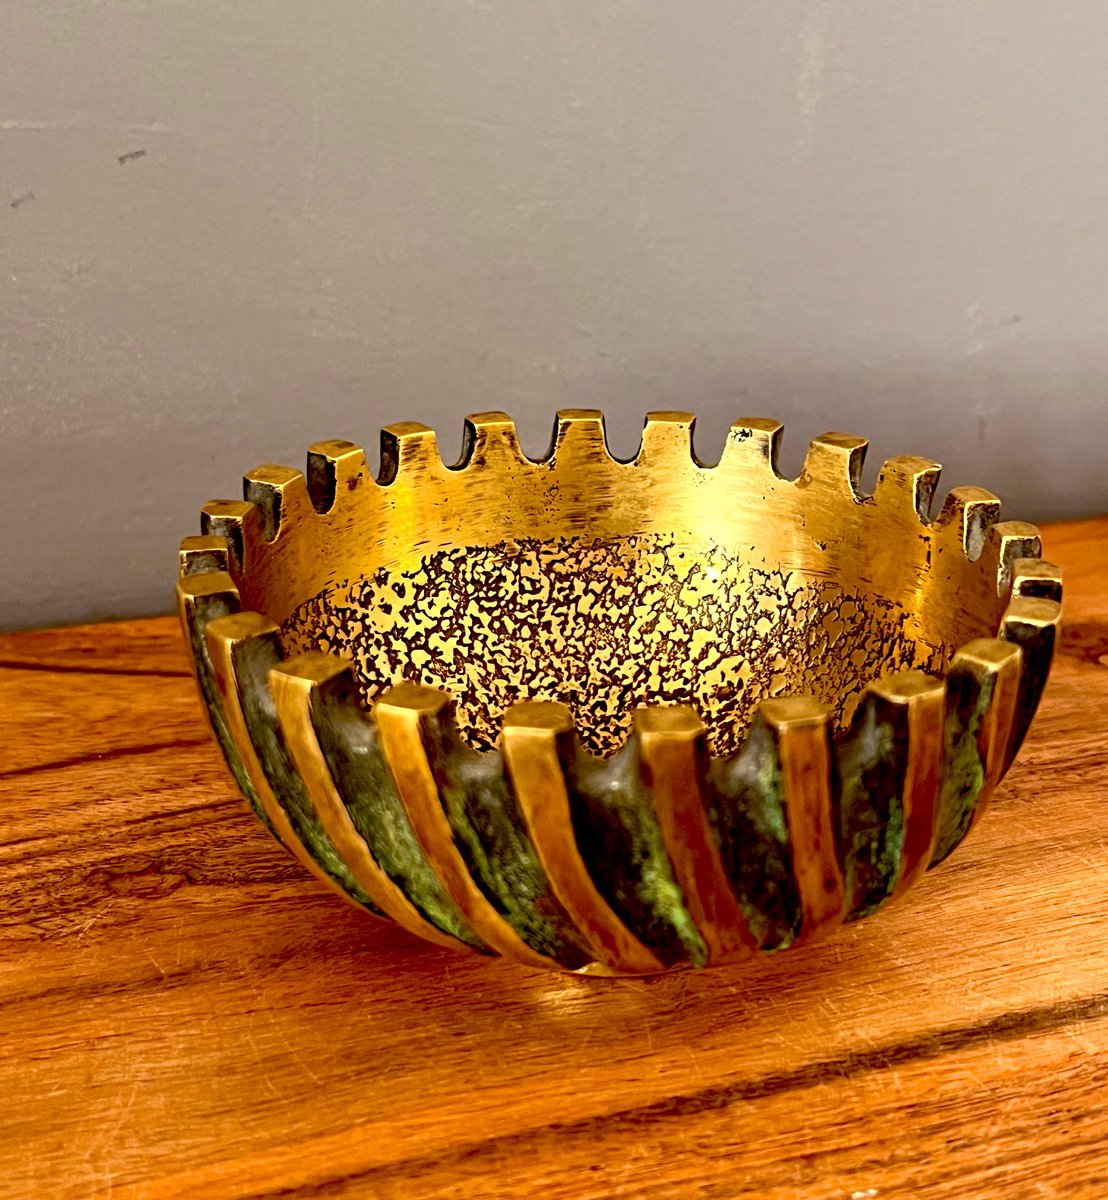 Pal Bell Style Israeli Limited Edition Ash Tray by ThePhenomenalOnes etsy.me/45GBSZb via @Etsy 🌺🌺🌺EVERYTHING 20% OFF!🌺🌺🌺#giftforherideas #giftforher #antiques #vintagedecor